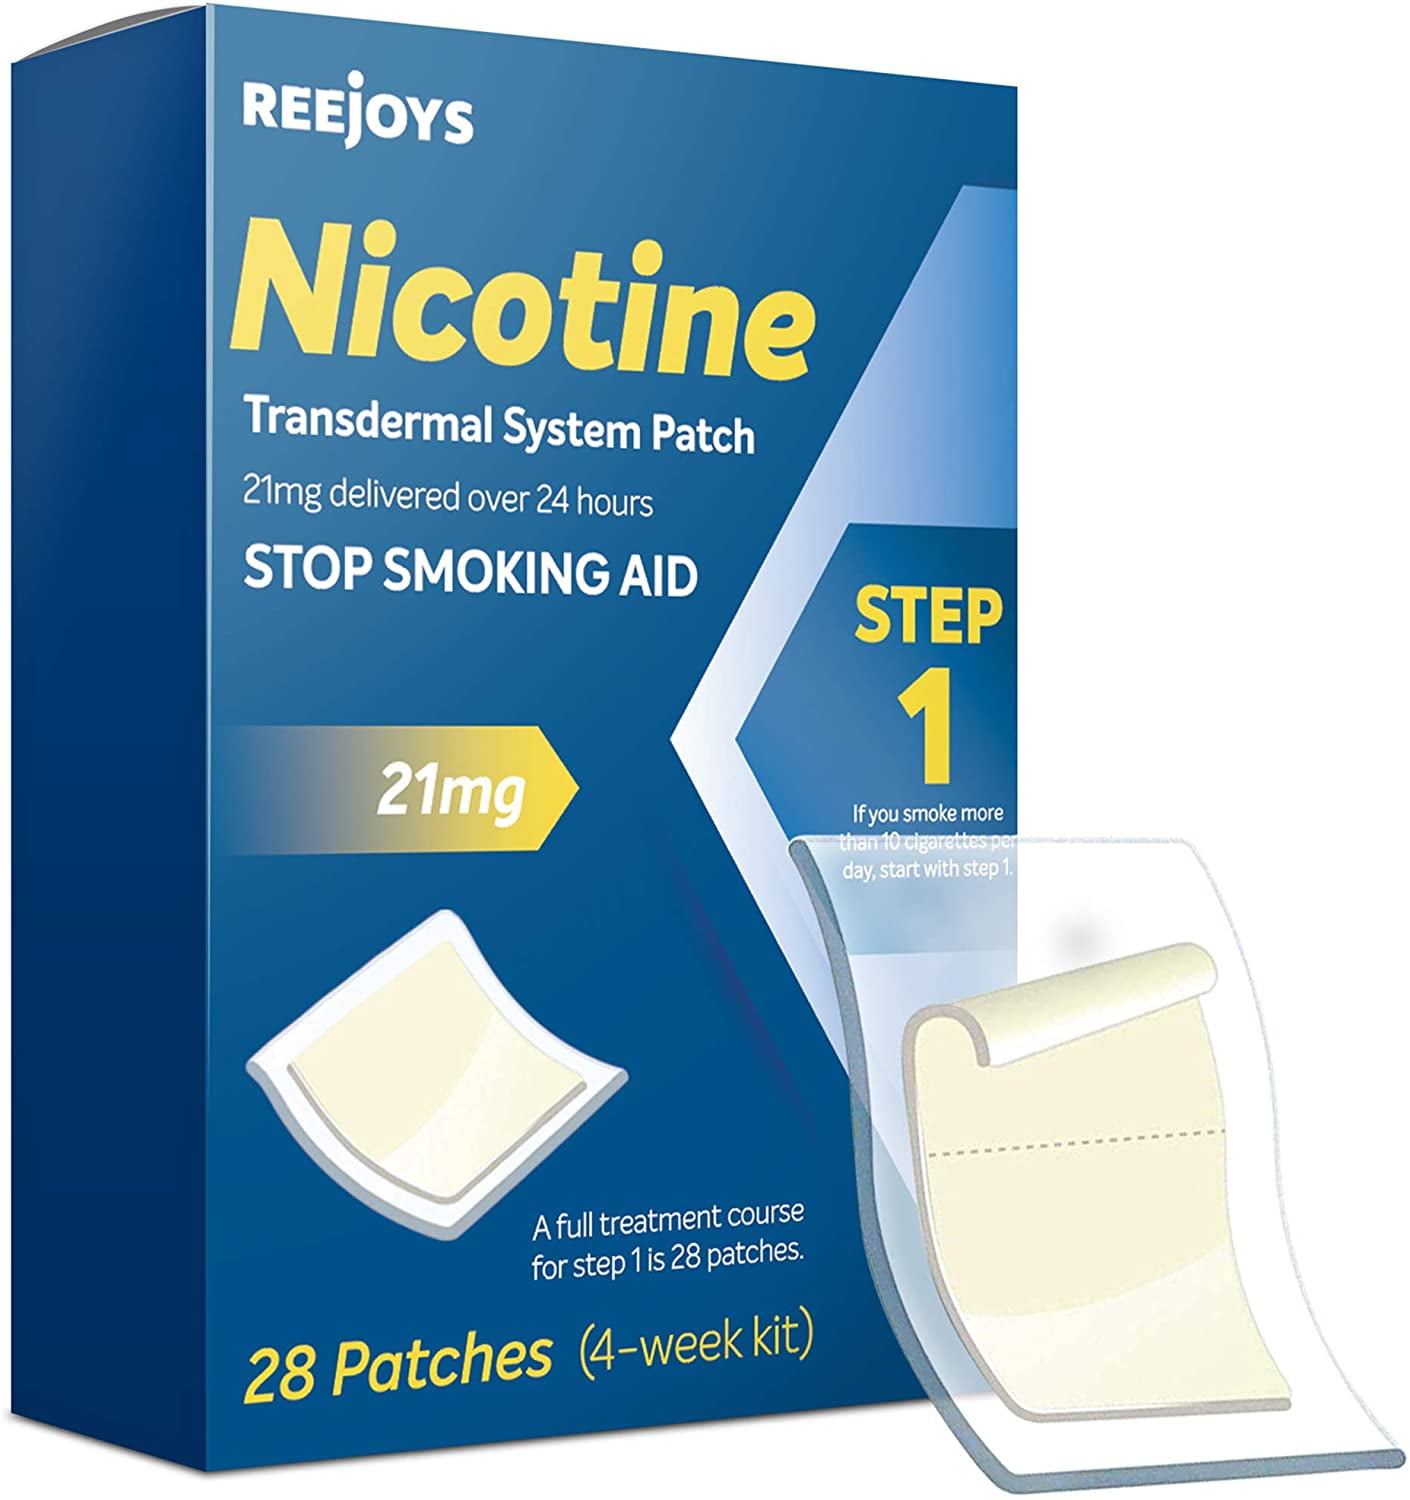 What Can Happen If You Use Too Many Nicotine Patches?